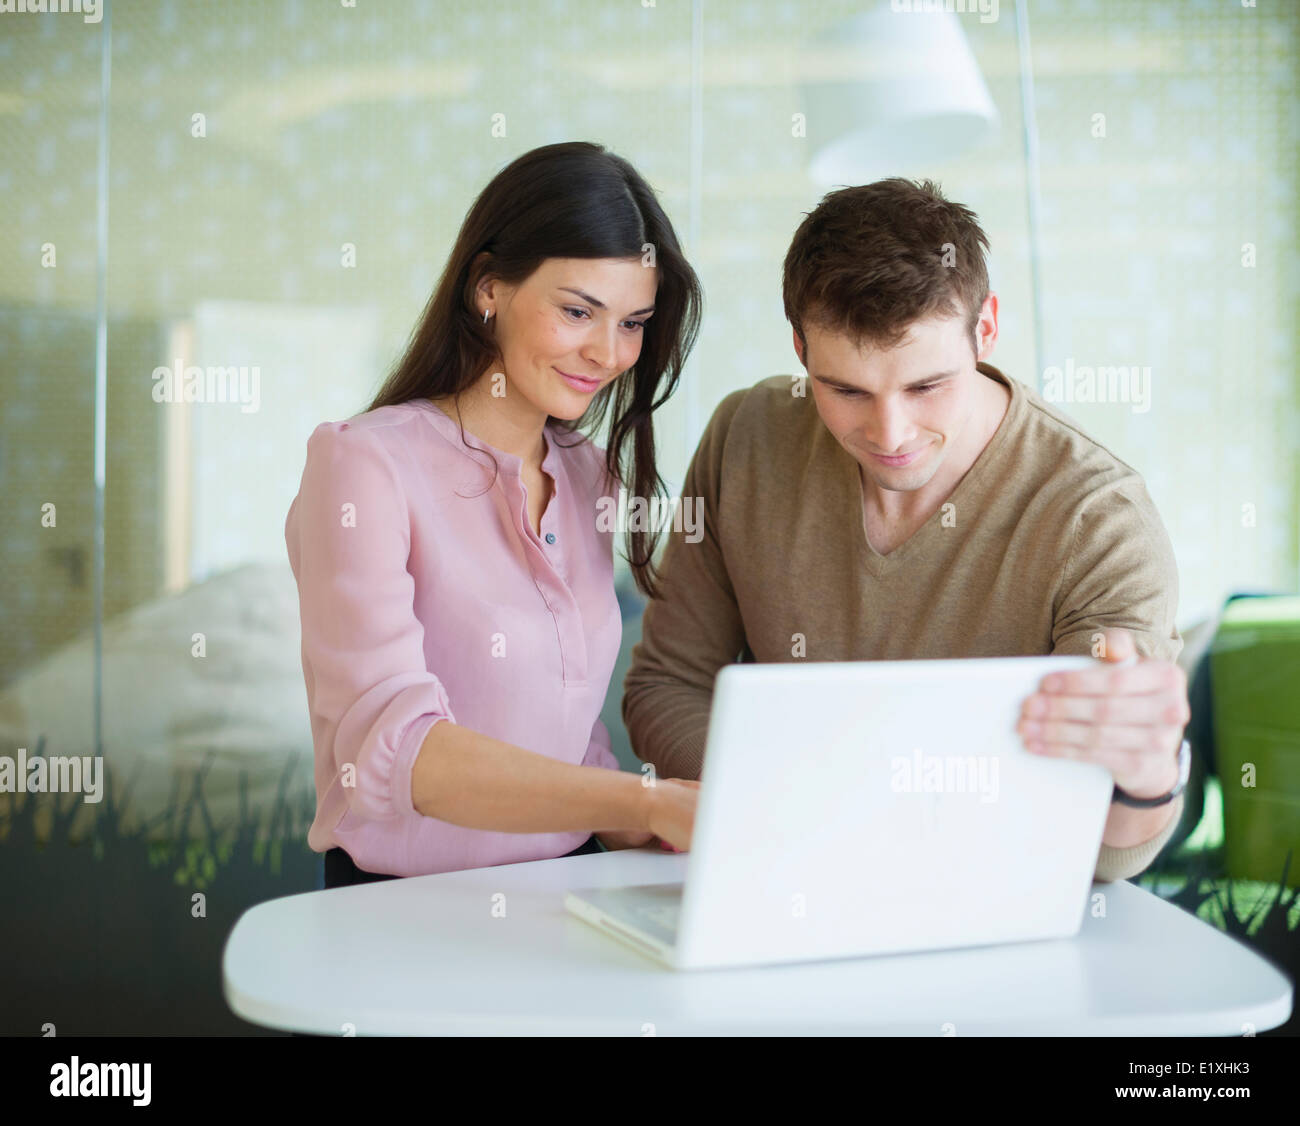 Young businessman and businesswoman using laptop at table Banque D'Images